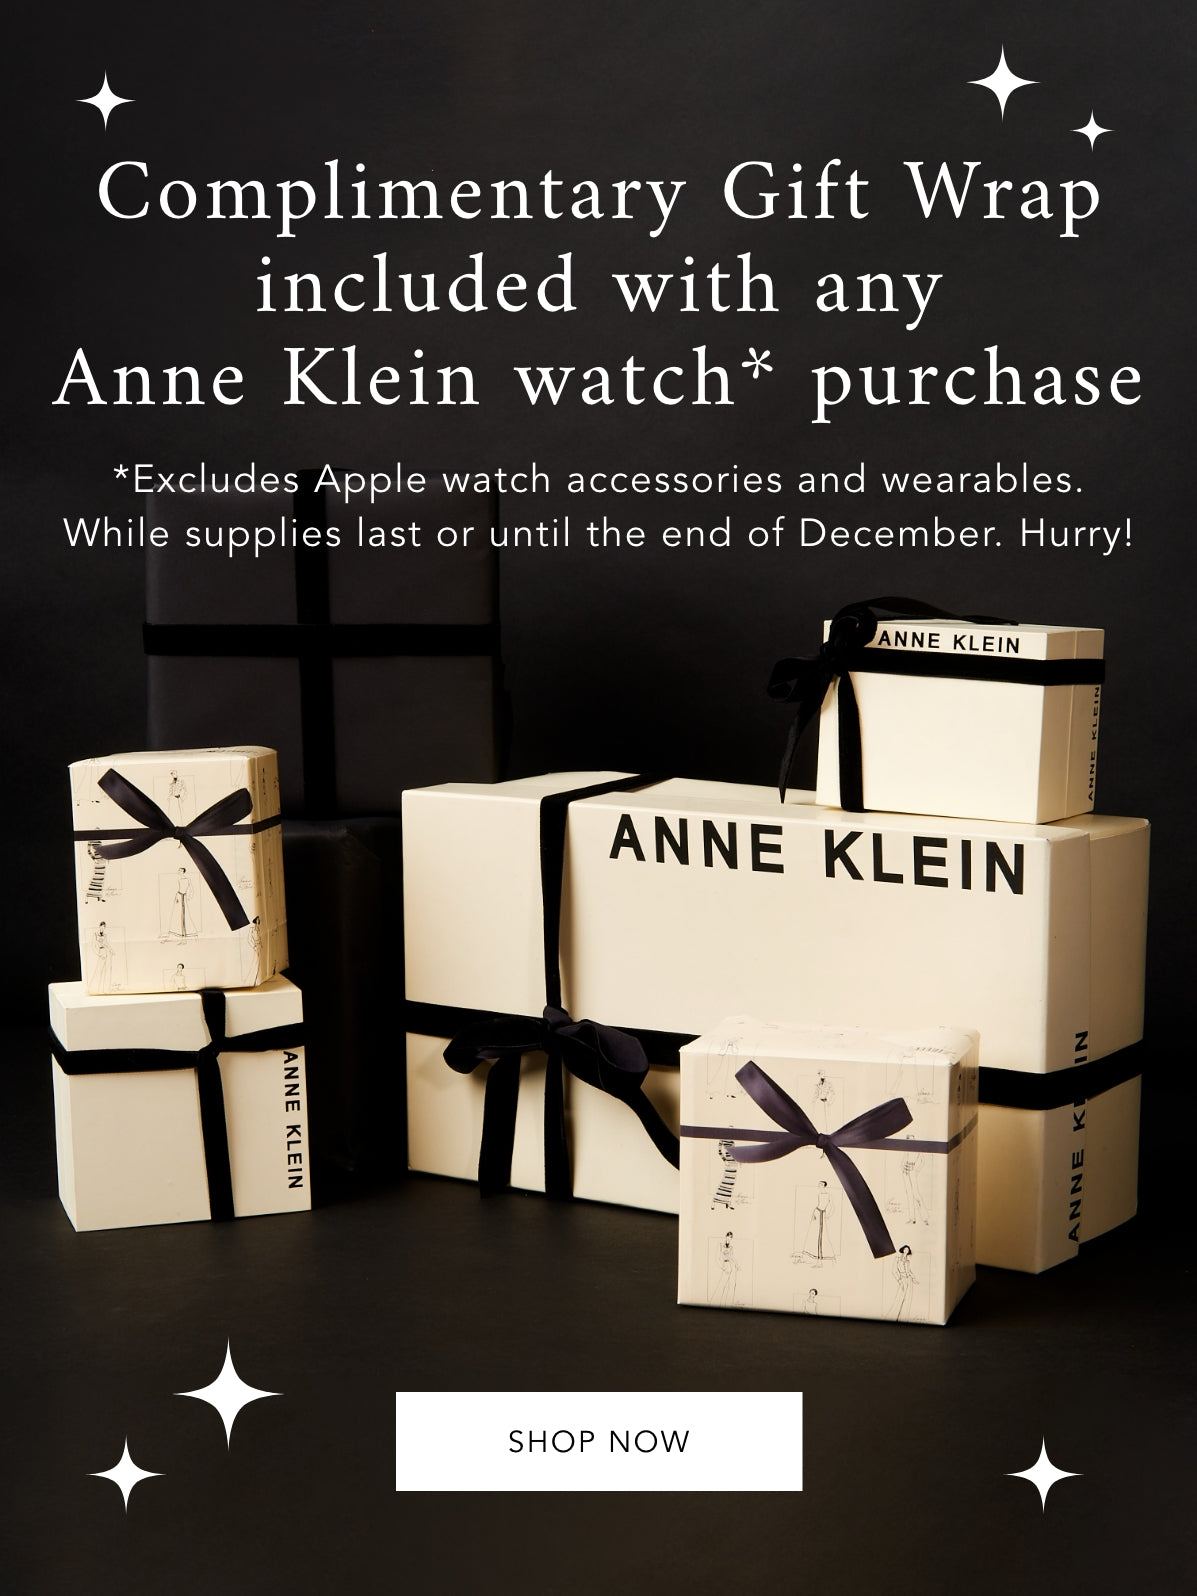 complimentary gift wrap included with any anne klein watch purchase, excluded apple watch accessories and wearable. whole supplies lasts or until end of December. hurry, shop now. image of boxes wrapped in anne klein wrapping paper